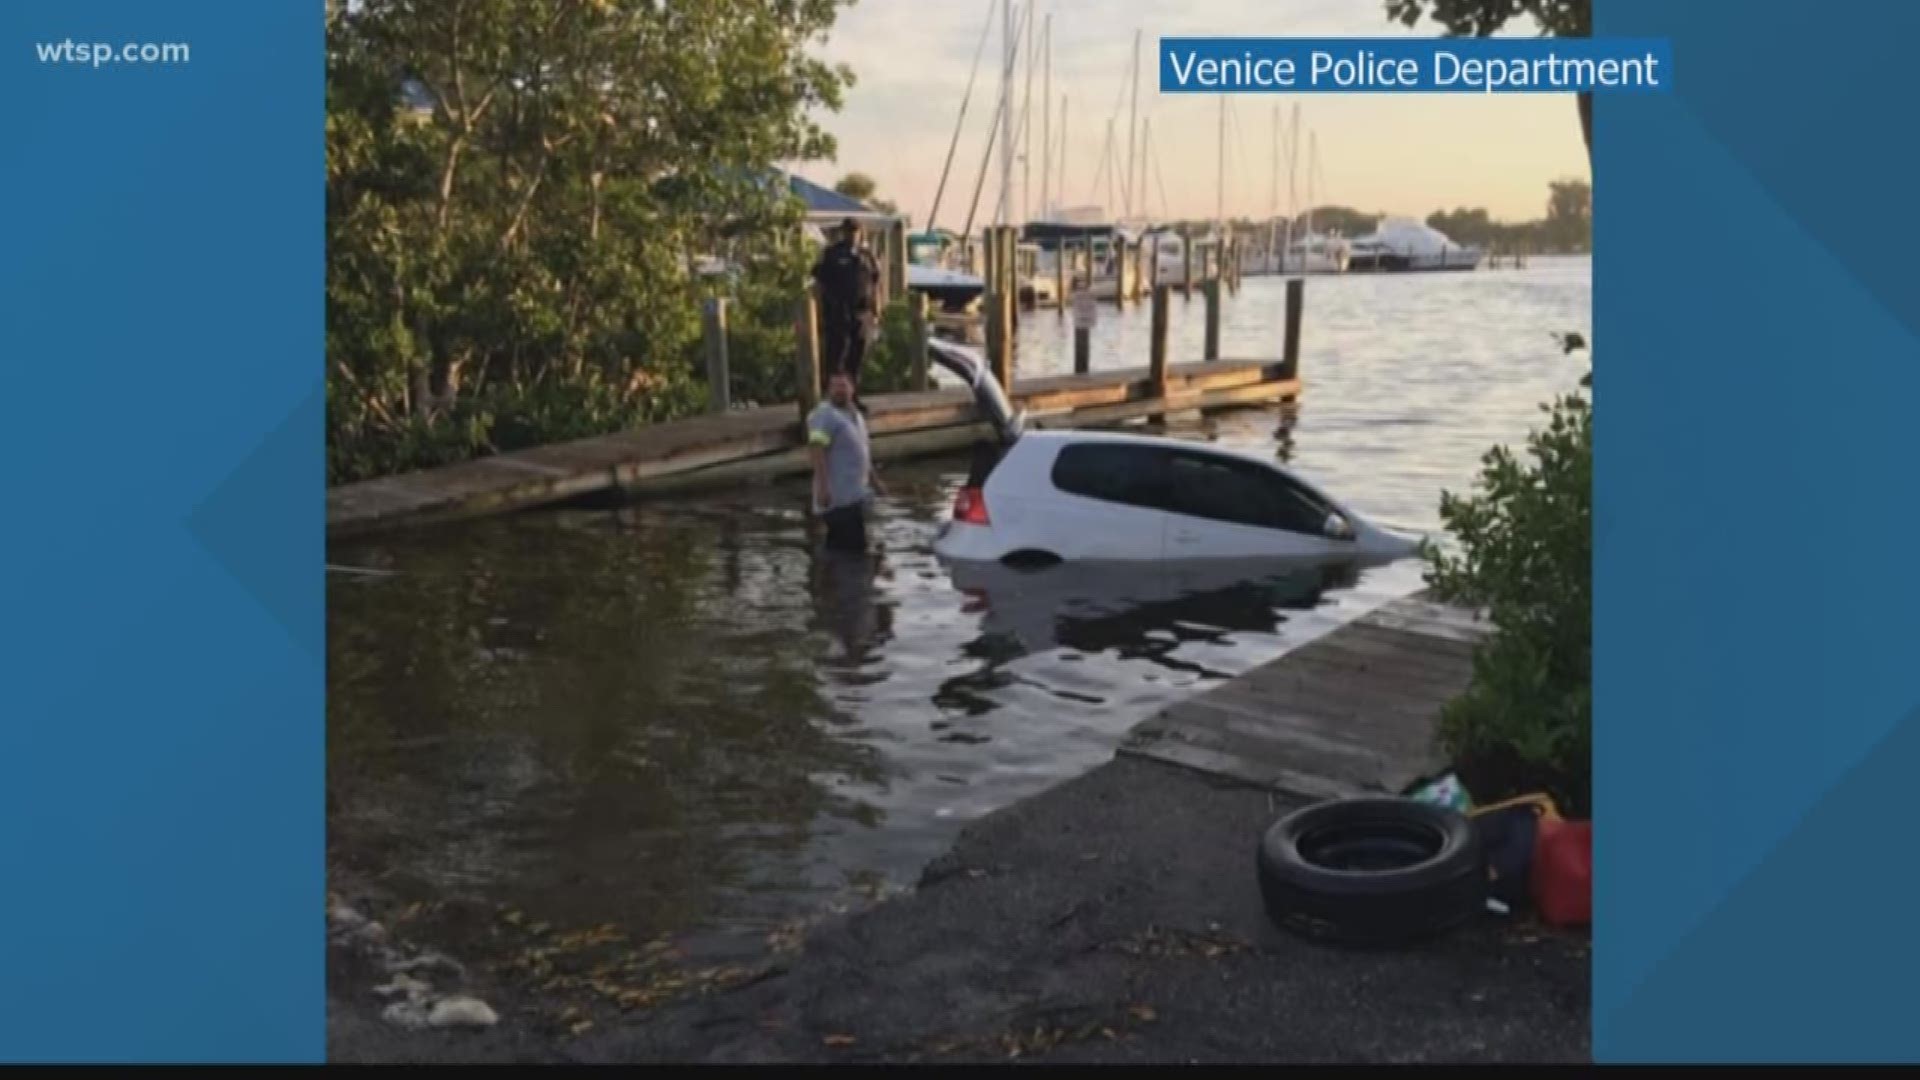 The kayaker was near the Higel Boat Ramp when he noticed the SUV and then saw a woman inside.